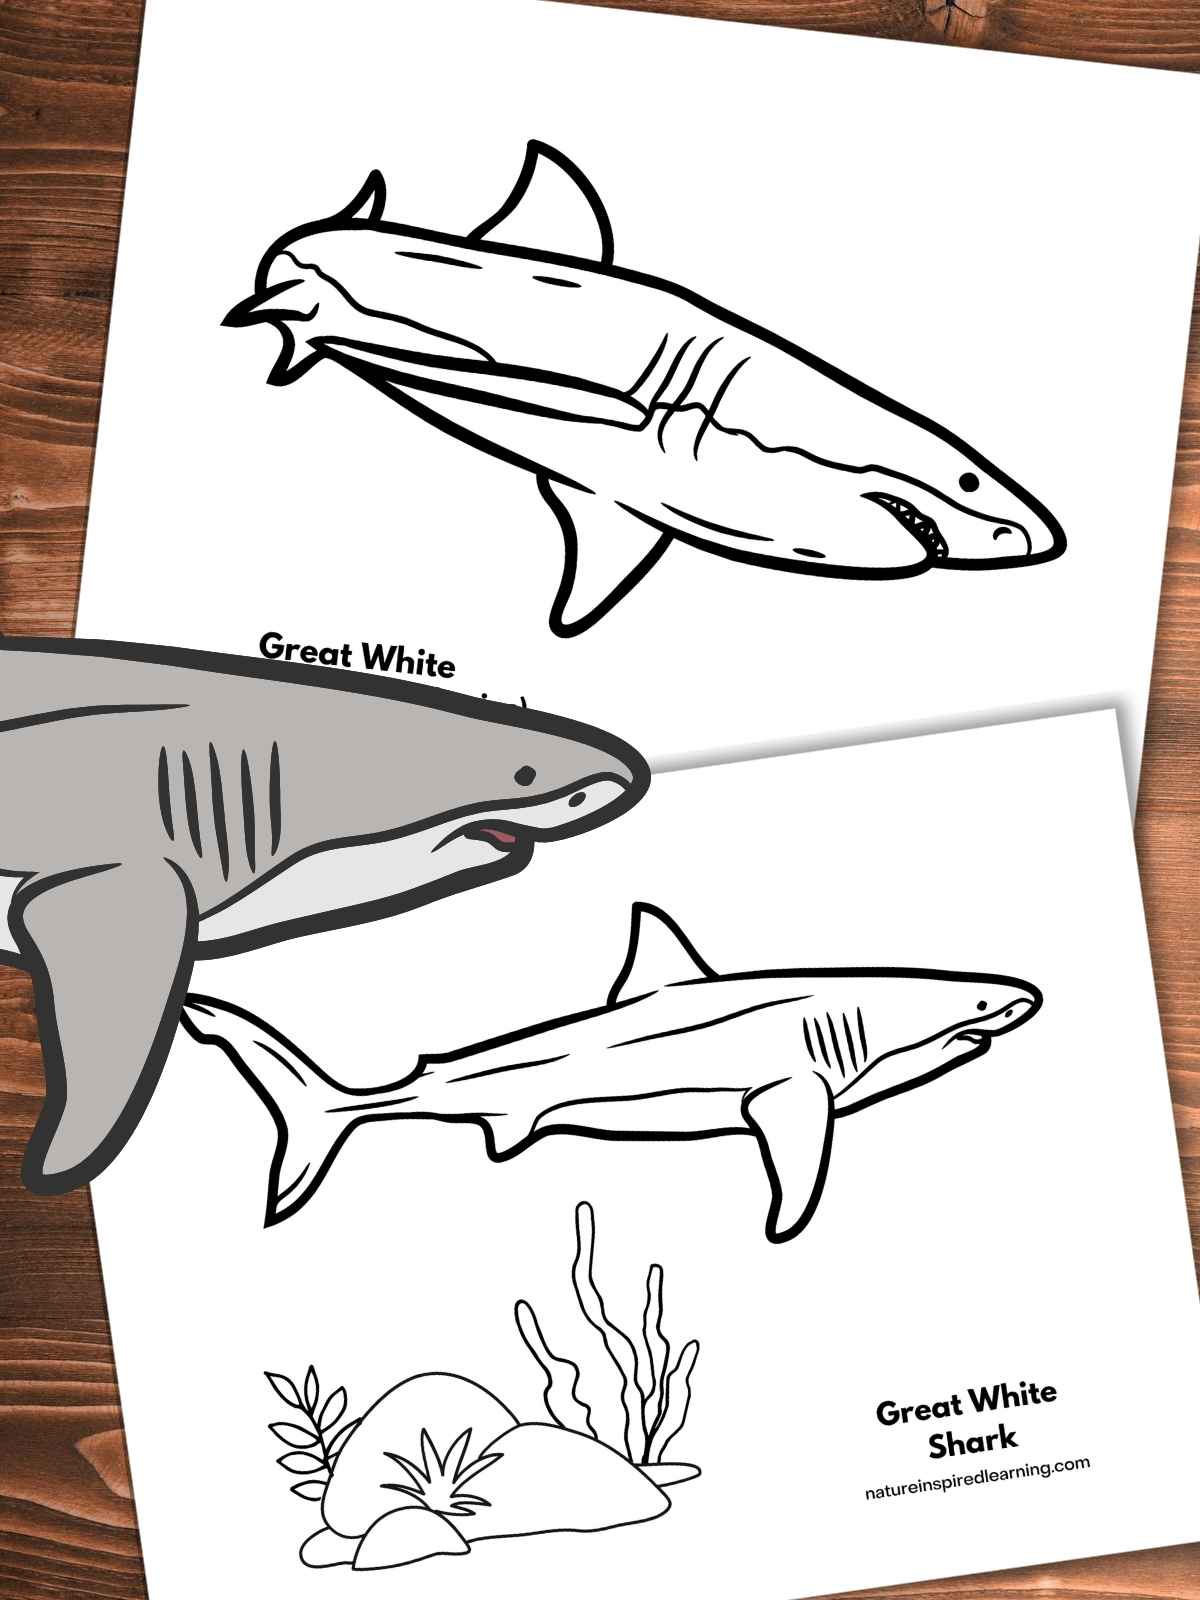 two black and white coloring pages with images of great white sharks swimming on a wooden background. Gray shark left side.